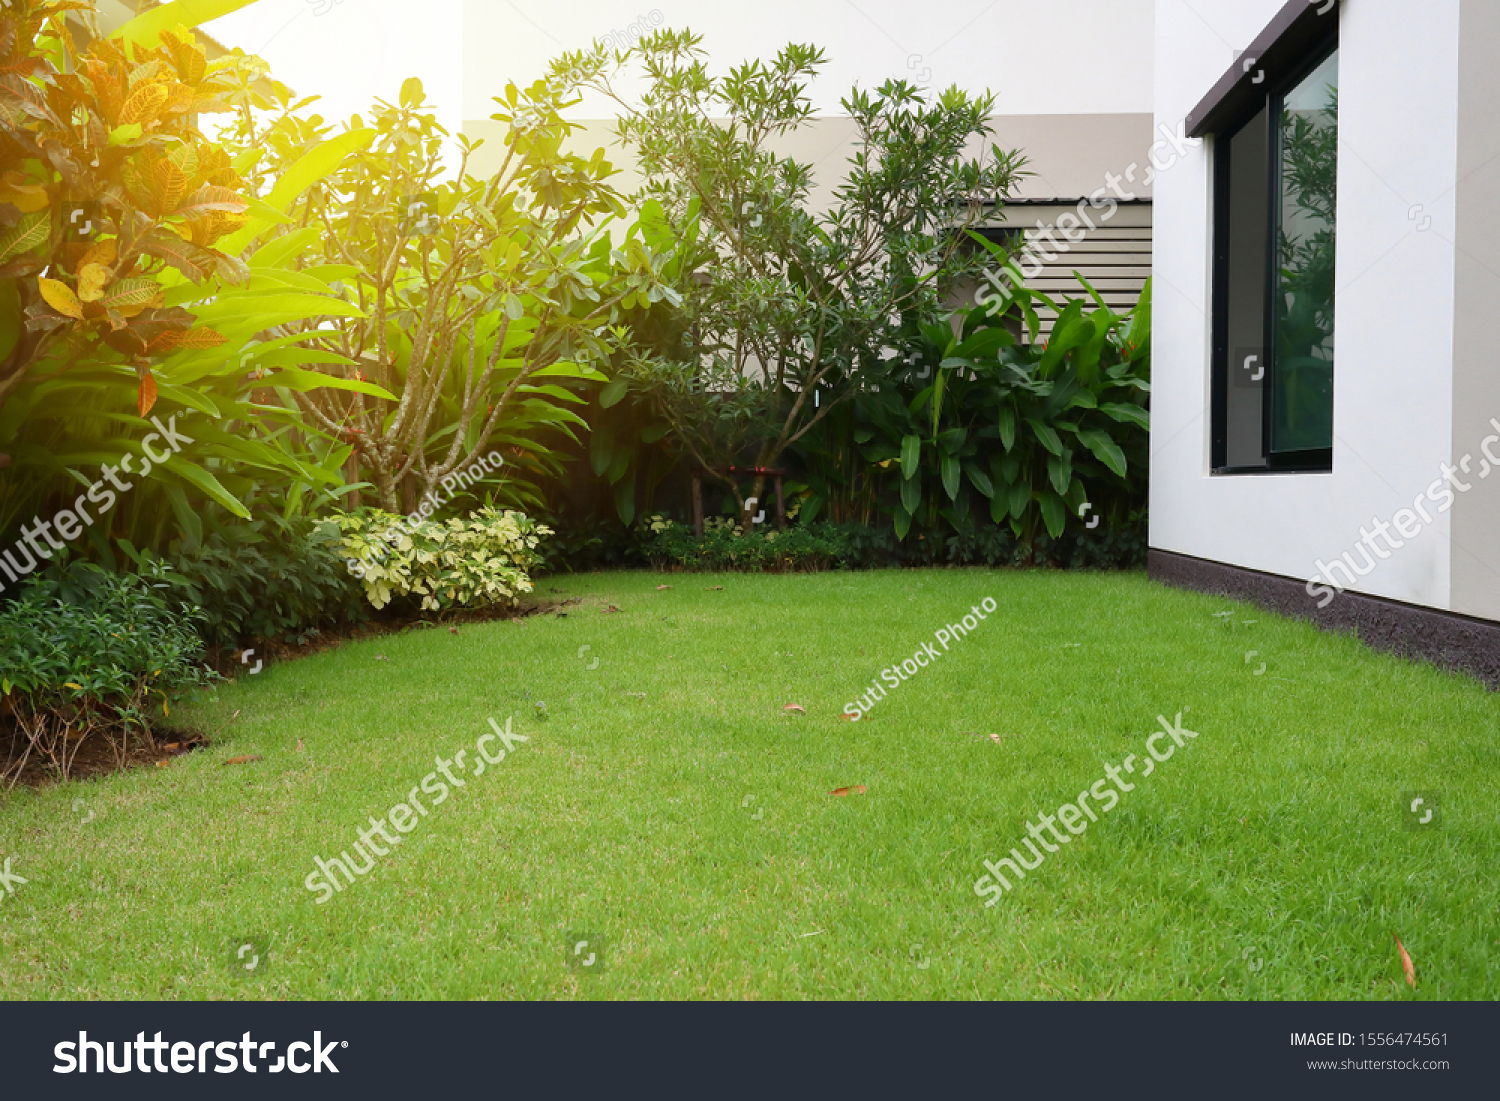 lawn landscaping with green grass turf in garden home #1556474561